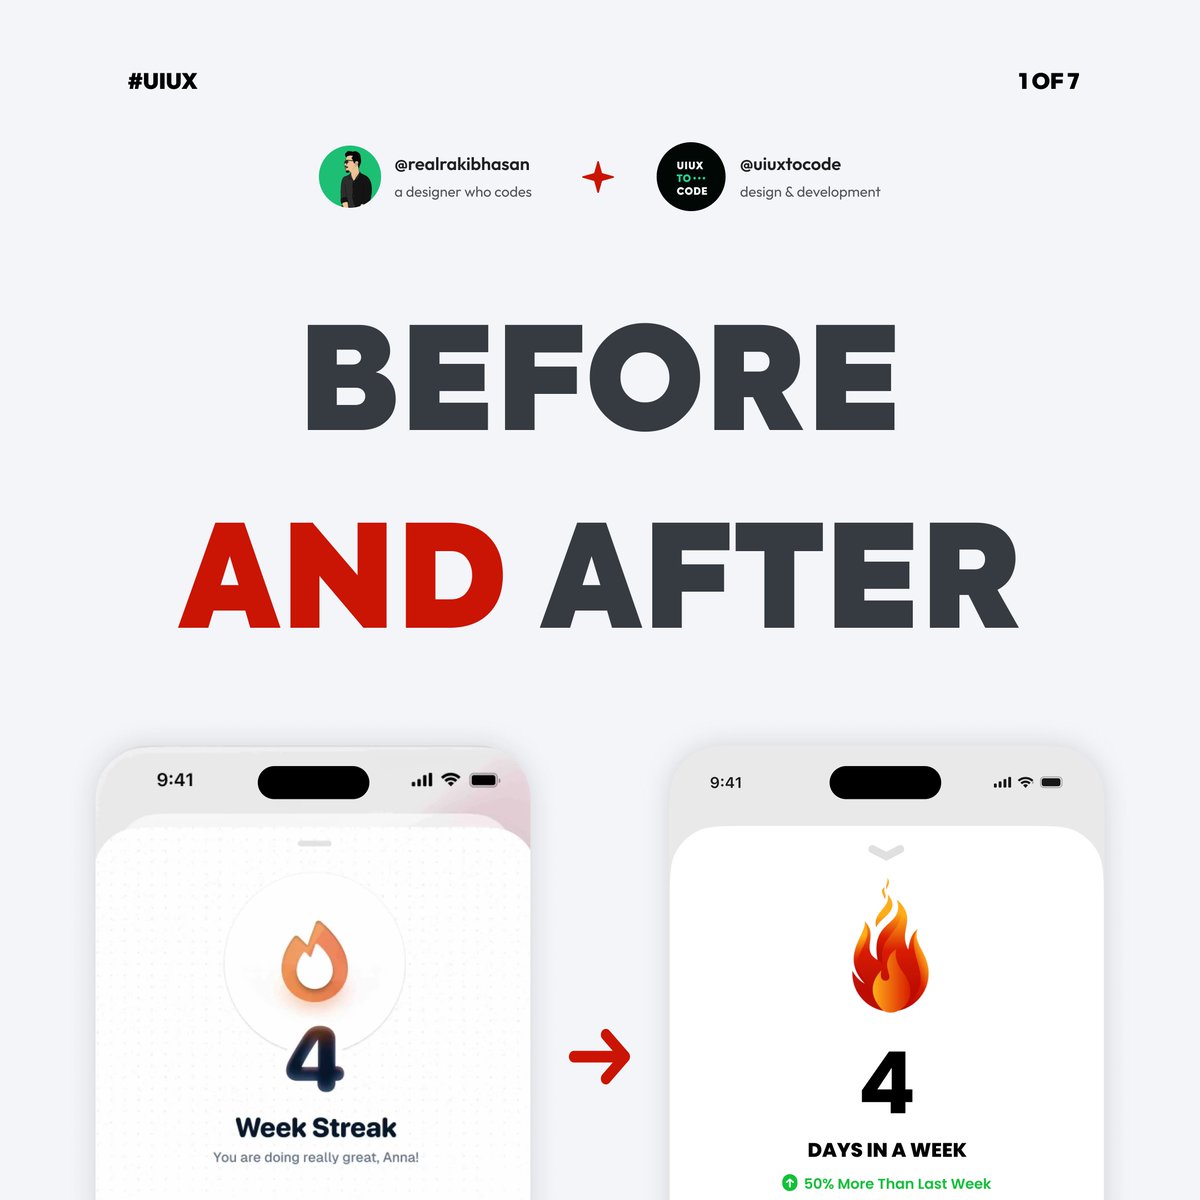 Before and after implementing the UX into an existing design!

Say Hello 👋 
zaap.bio/uiuxtocode

Stay tuned for more design related resources 🤝

#ui #ux #uxdesign #uidesign #learnui #learnux  #redesignchallenge #realrakibhasan #uiuxtocode